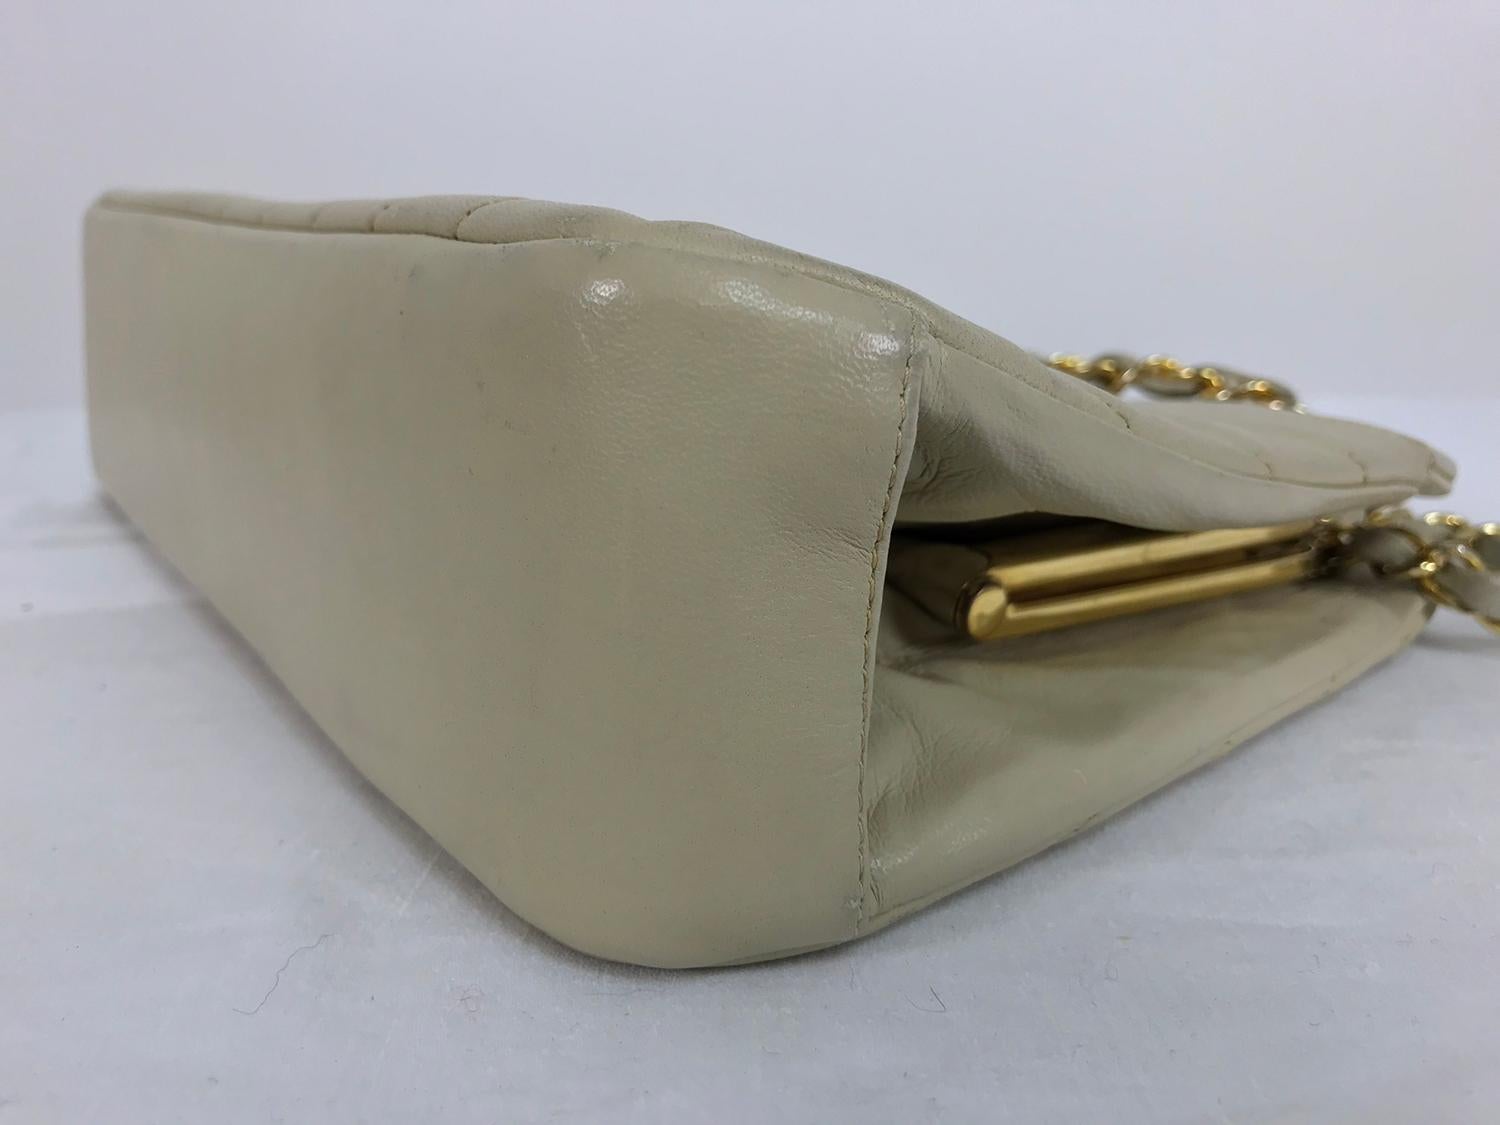 Chanel 1980s Ivory Chevron Kiss Lock Center Chain Handle Bag For Sale ...